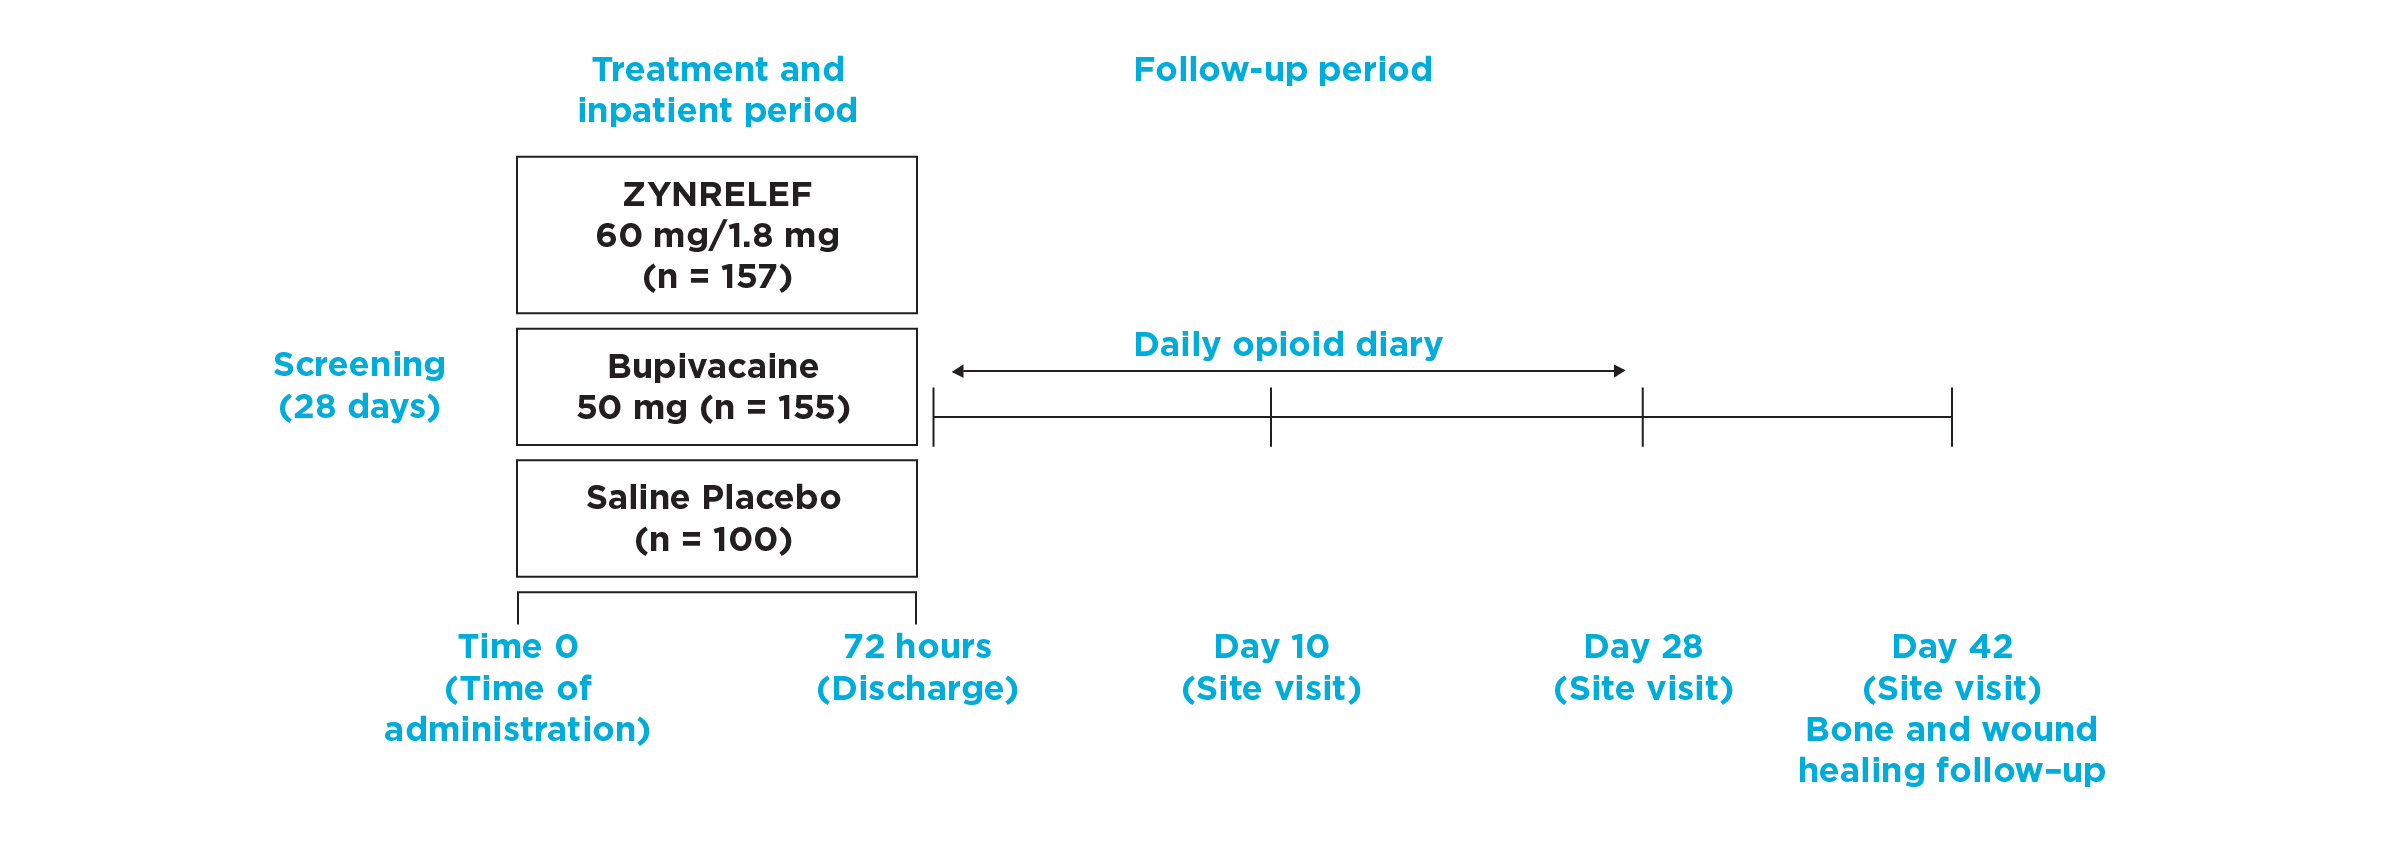 Timeline overview of EPOCH 1 Bunionectomy study design from screening through follow up.